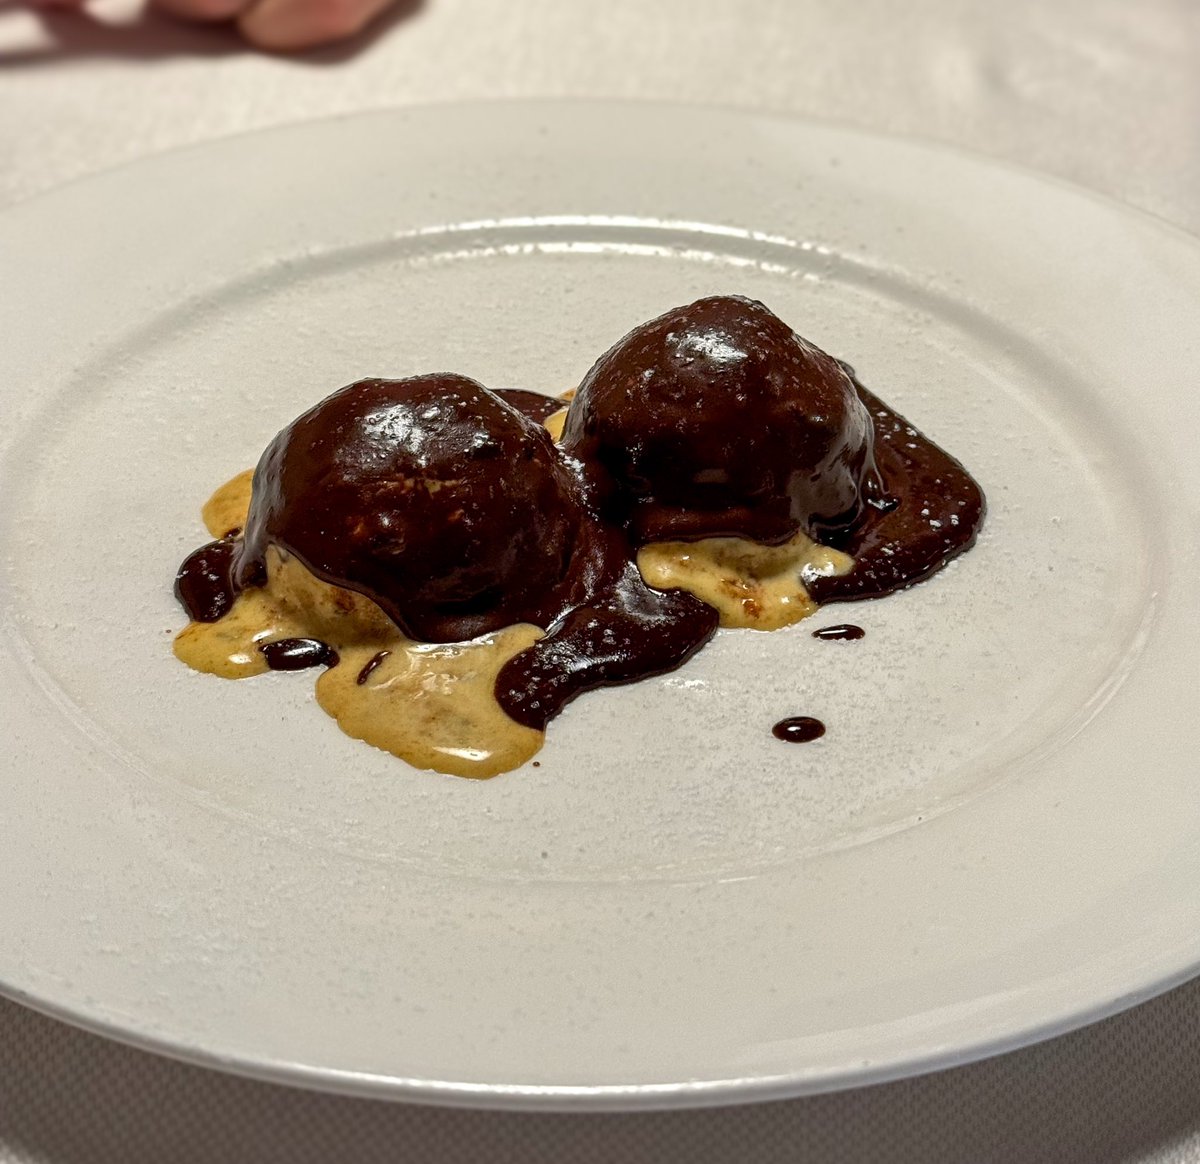 Can I tempt you with some fabulous food? Next time you’re in Rome, get a reservation at #TrattoriaMonti, which is a wonderful gustatory experience. Just a block south-east of Santa Maria Maggiore, it’s officially in the Esquiline, but the food is from the Marche region of Italy.